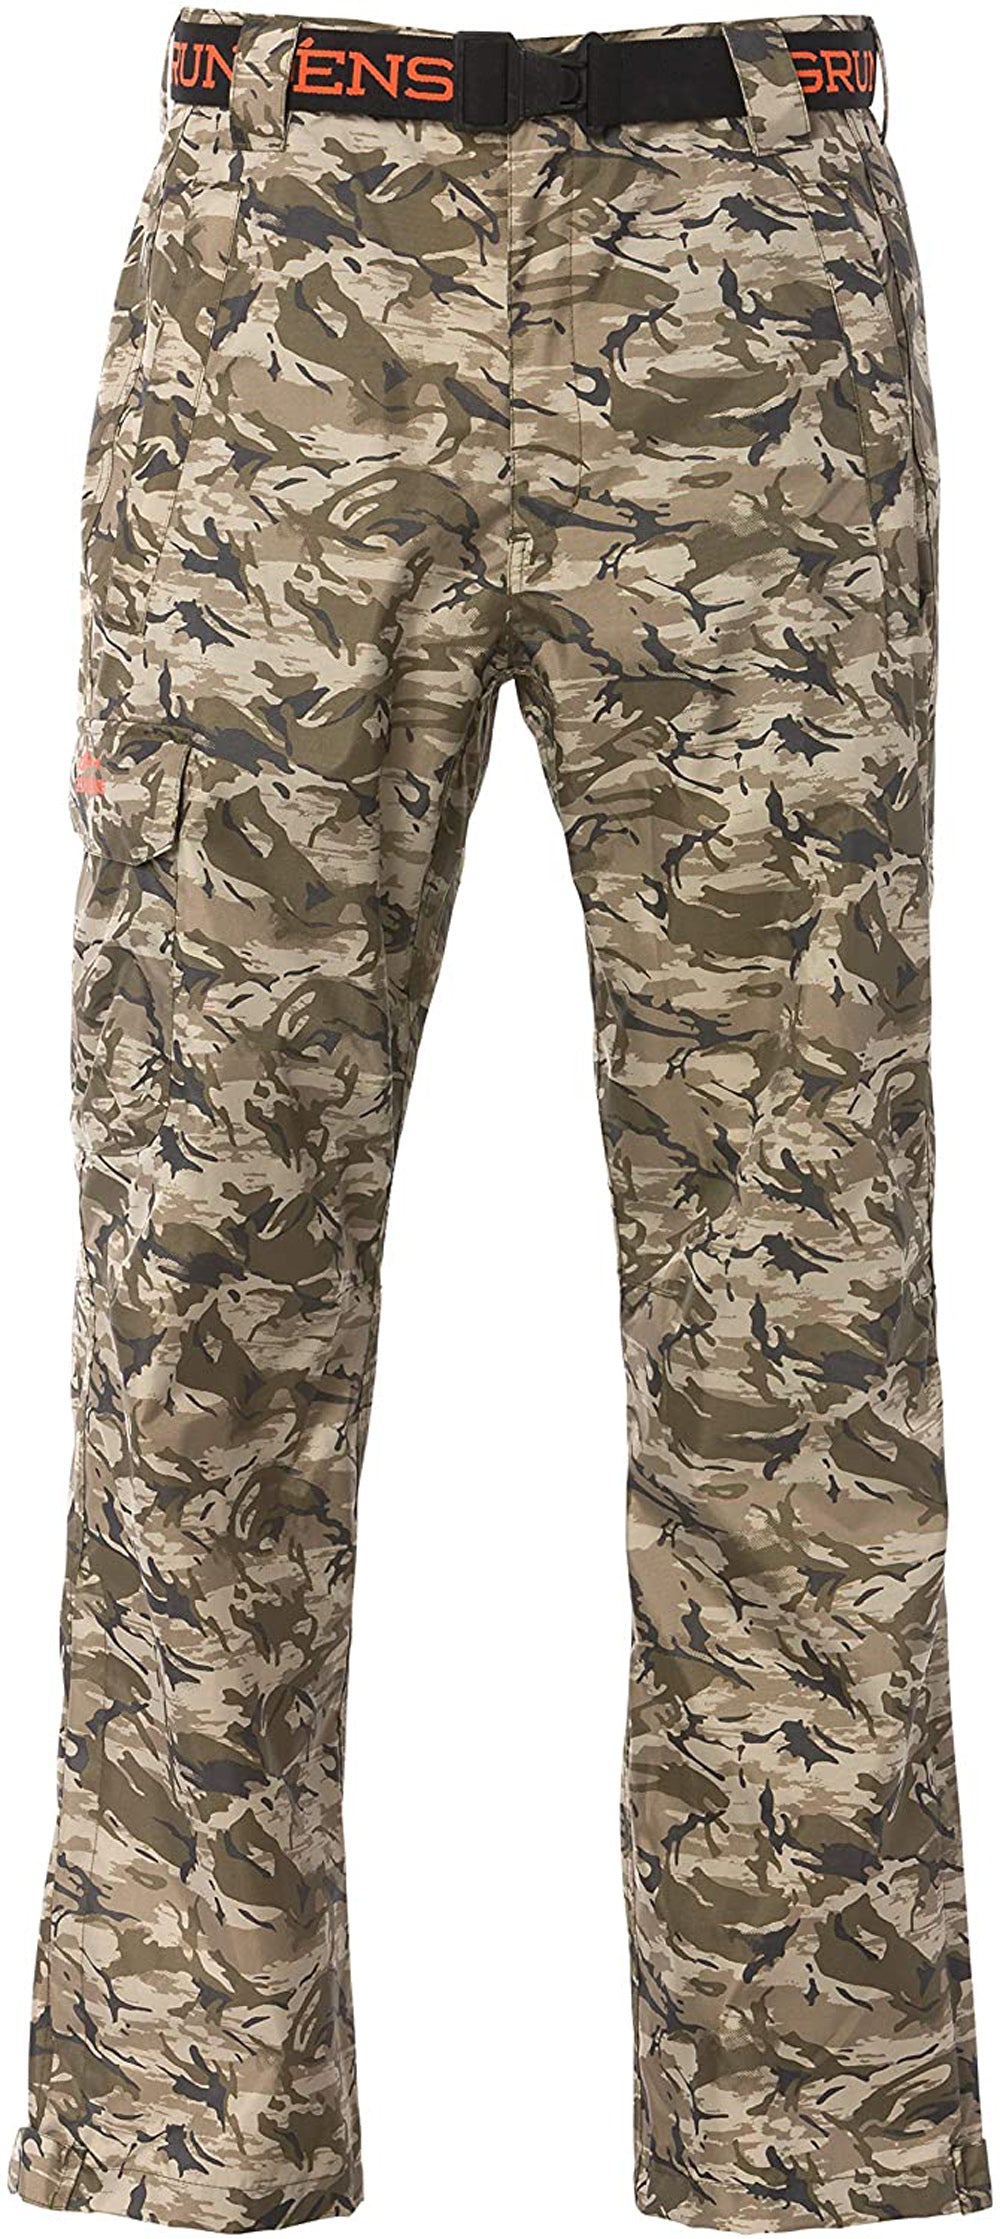 Weather Watch Pant in Refraction Camo Stone color from the front view